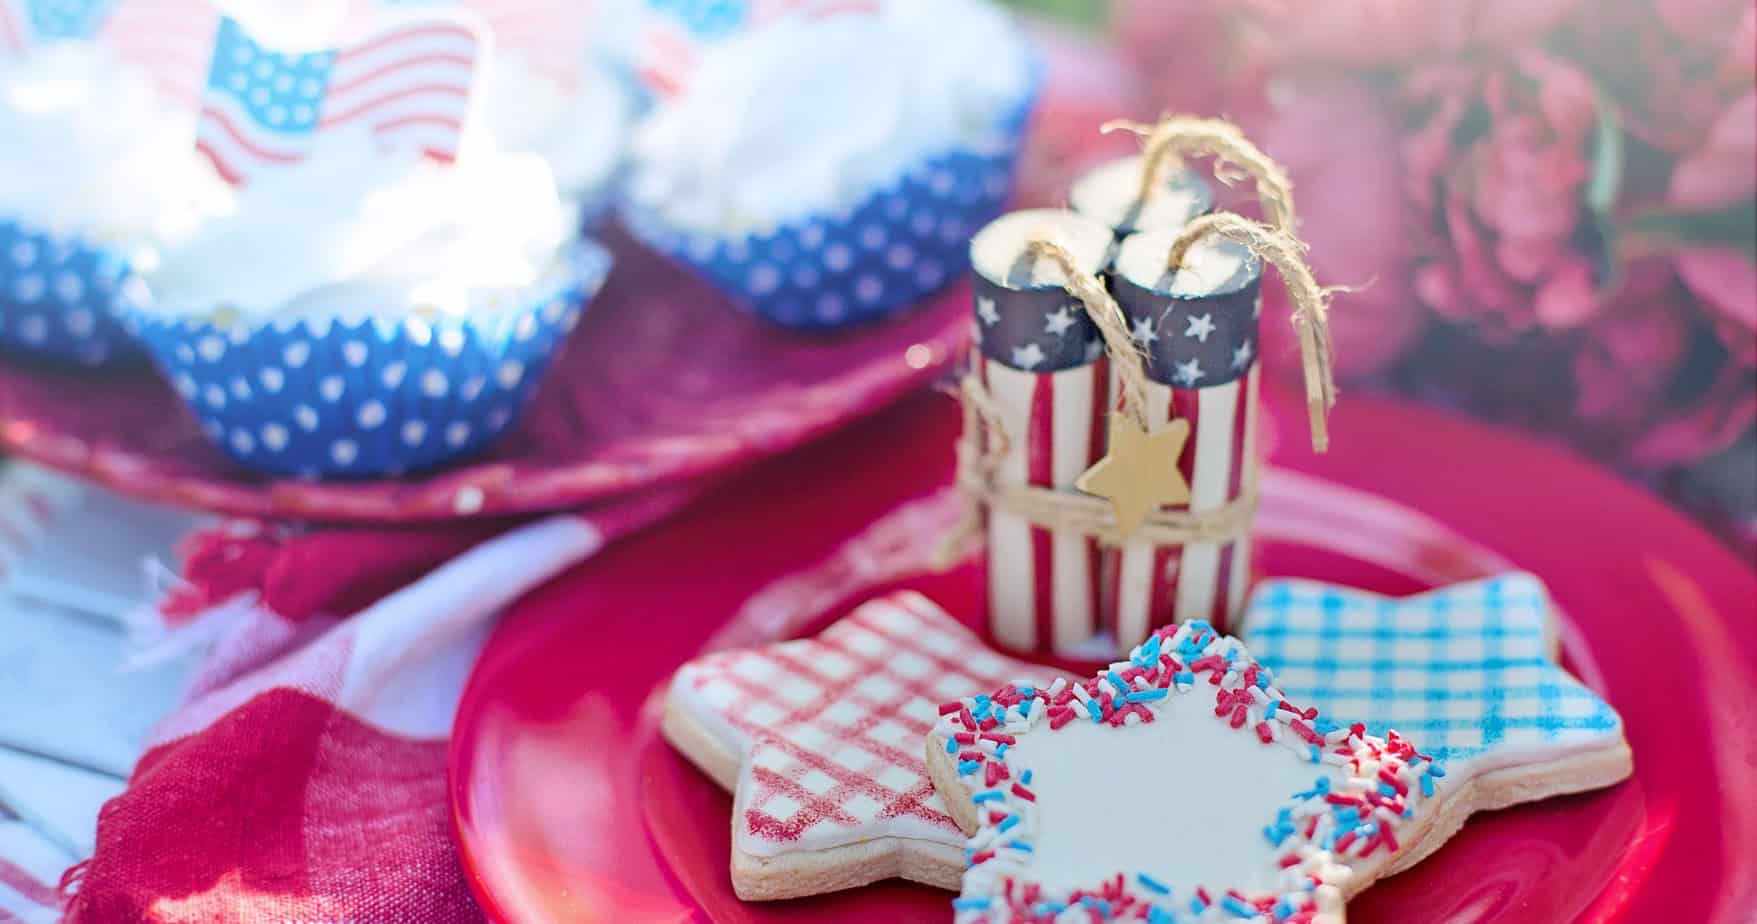 Cookies and Cupcakes decorated for the 4th of July Picnic with a centerpiece made of star-spangled faux firecrackers with long hemp wicks.